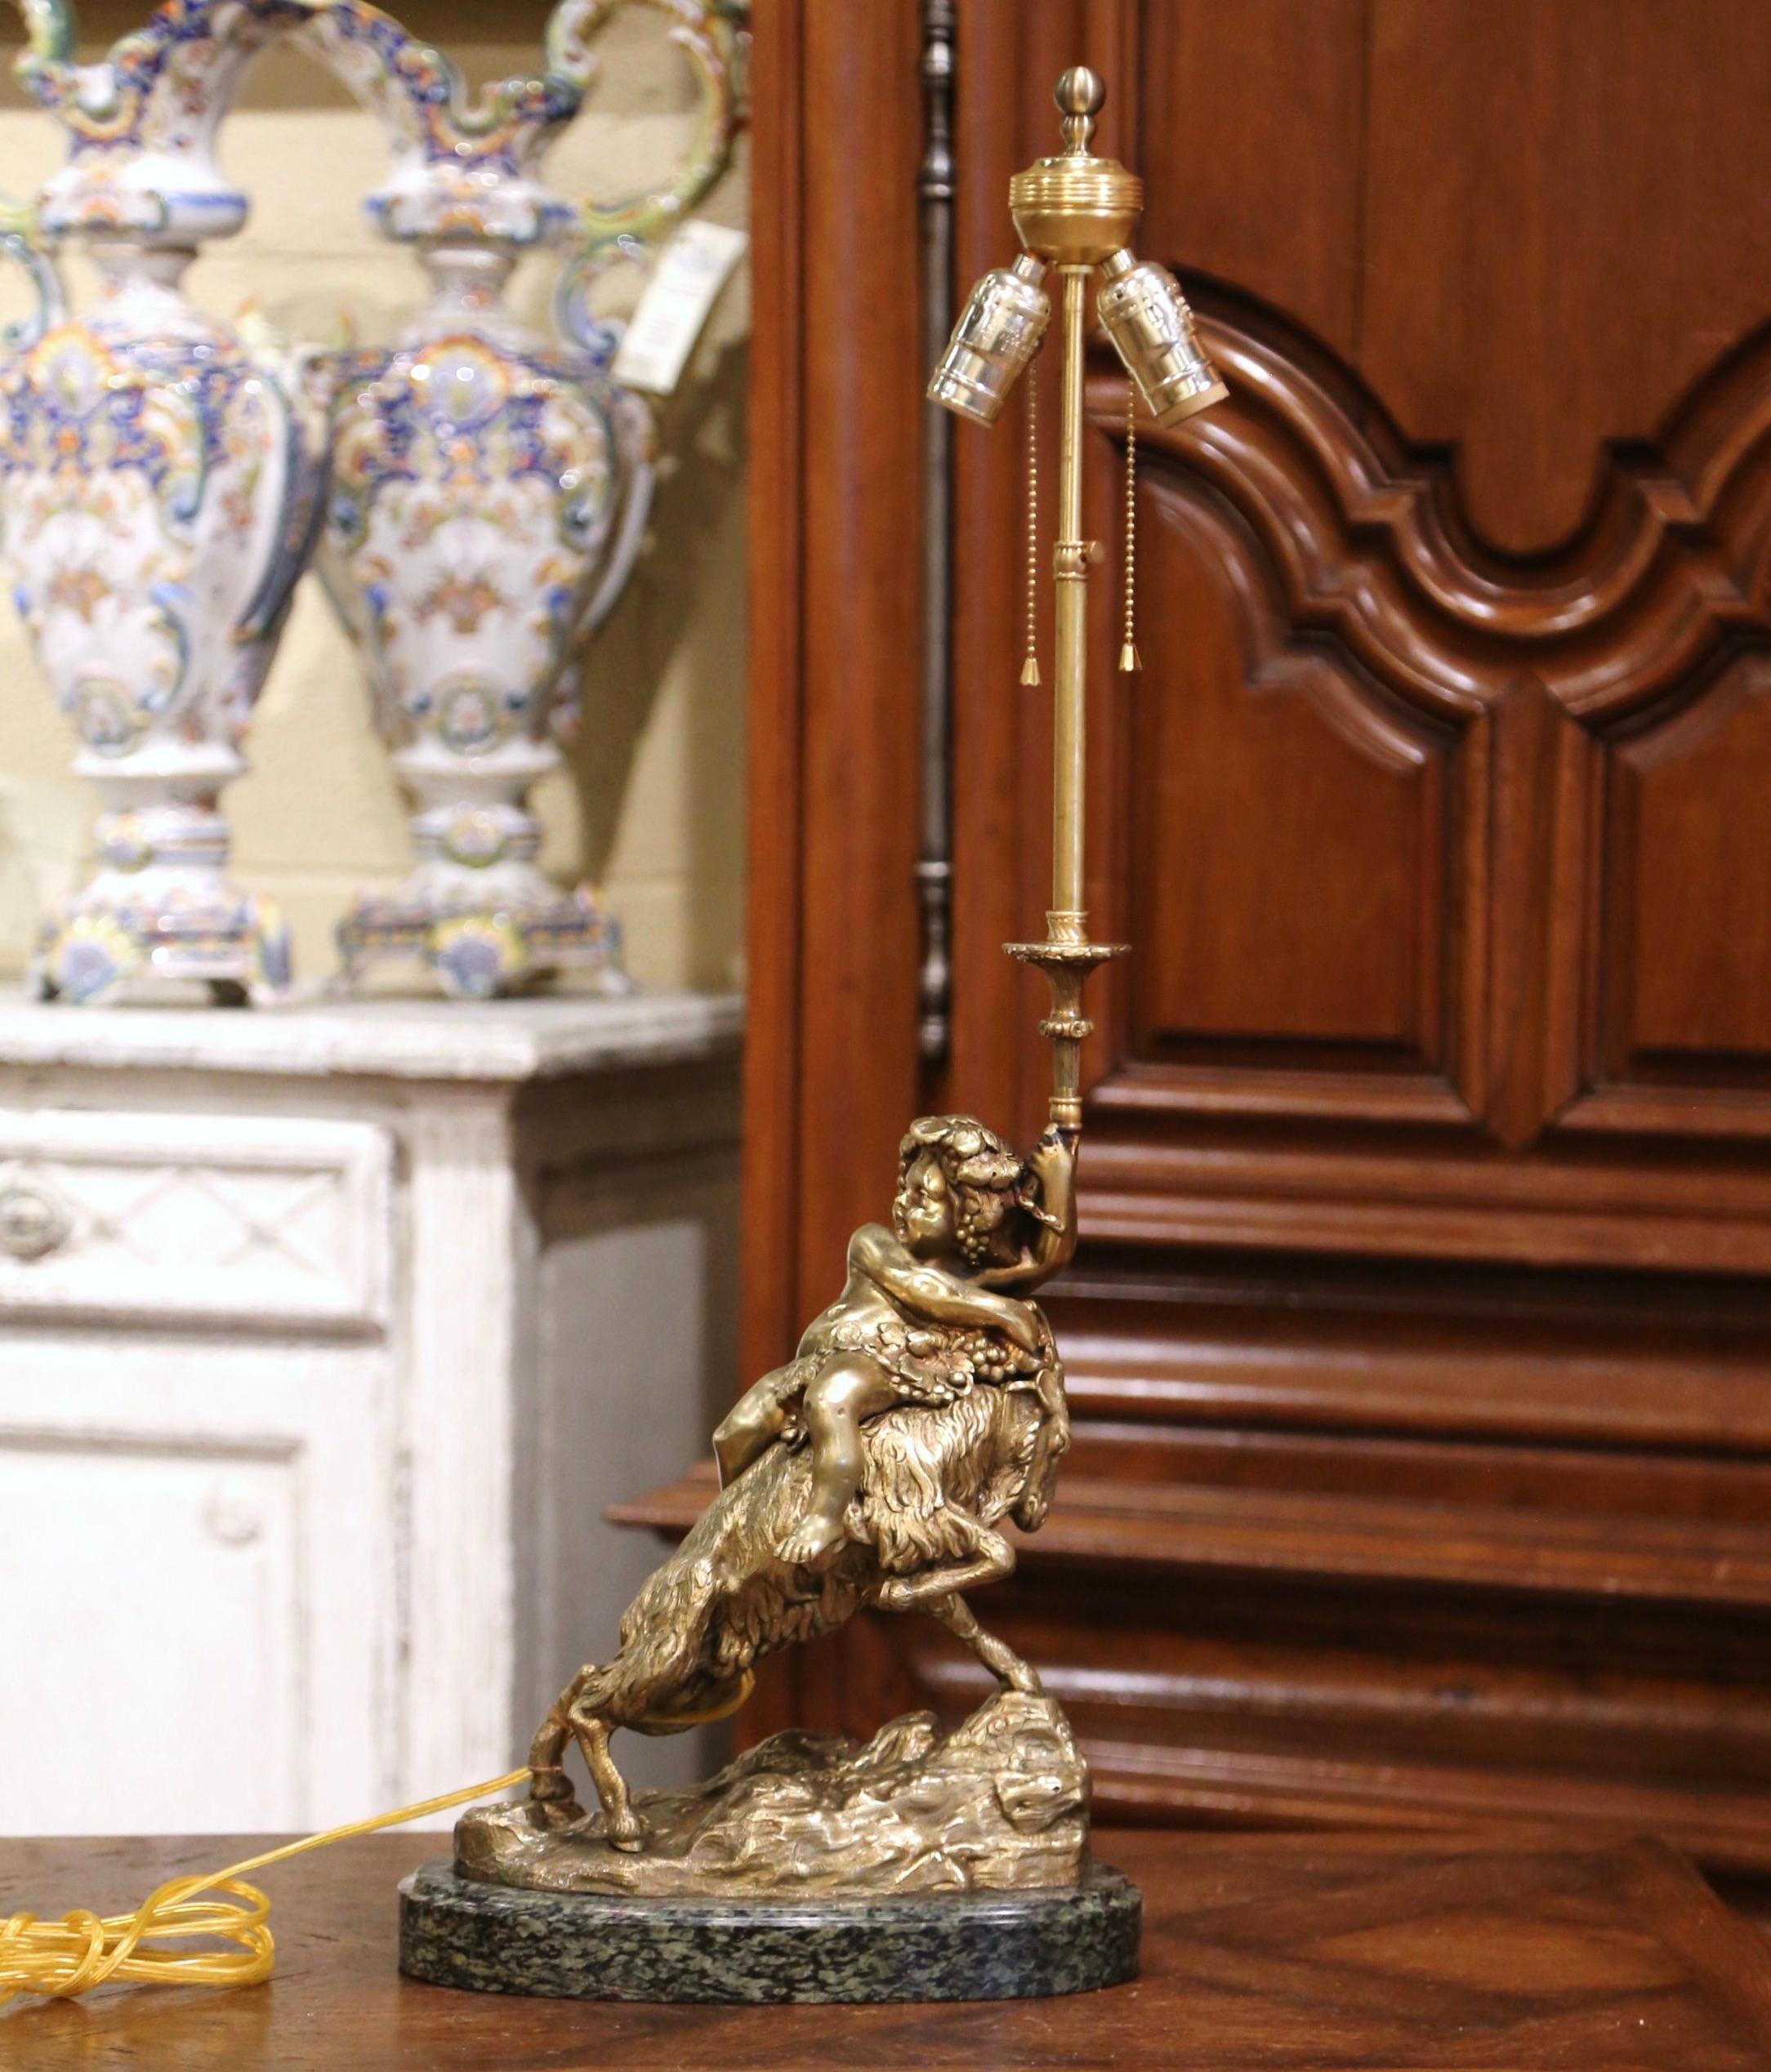 Decorate an office or study with this elegant antique figural lamp. Crafted in France circa 1870 and standing on an oval green marble base, the bronze doré composition features a cheerful young Bacchus figure sitting on a ram, decorated with grape